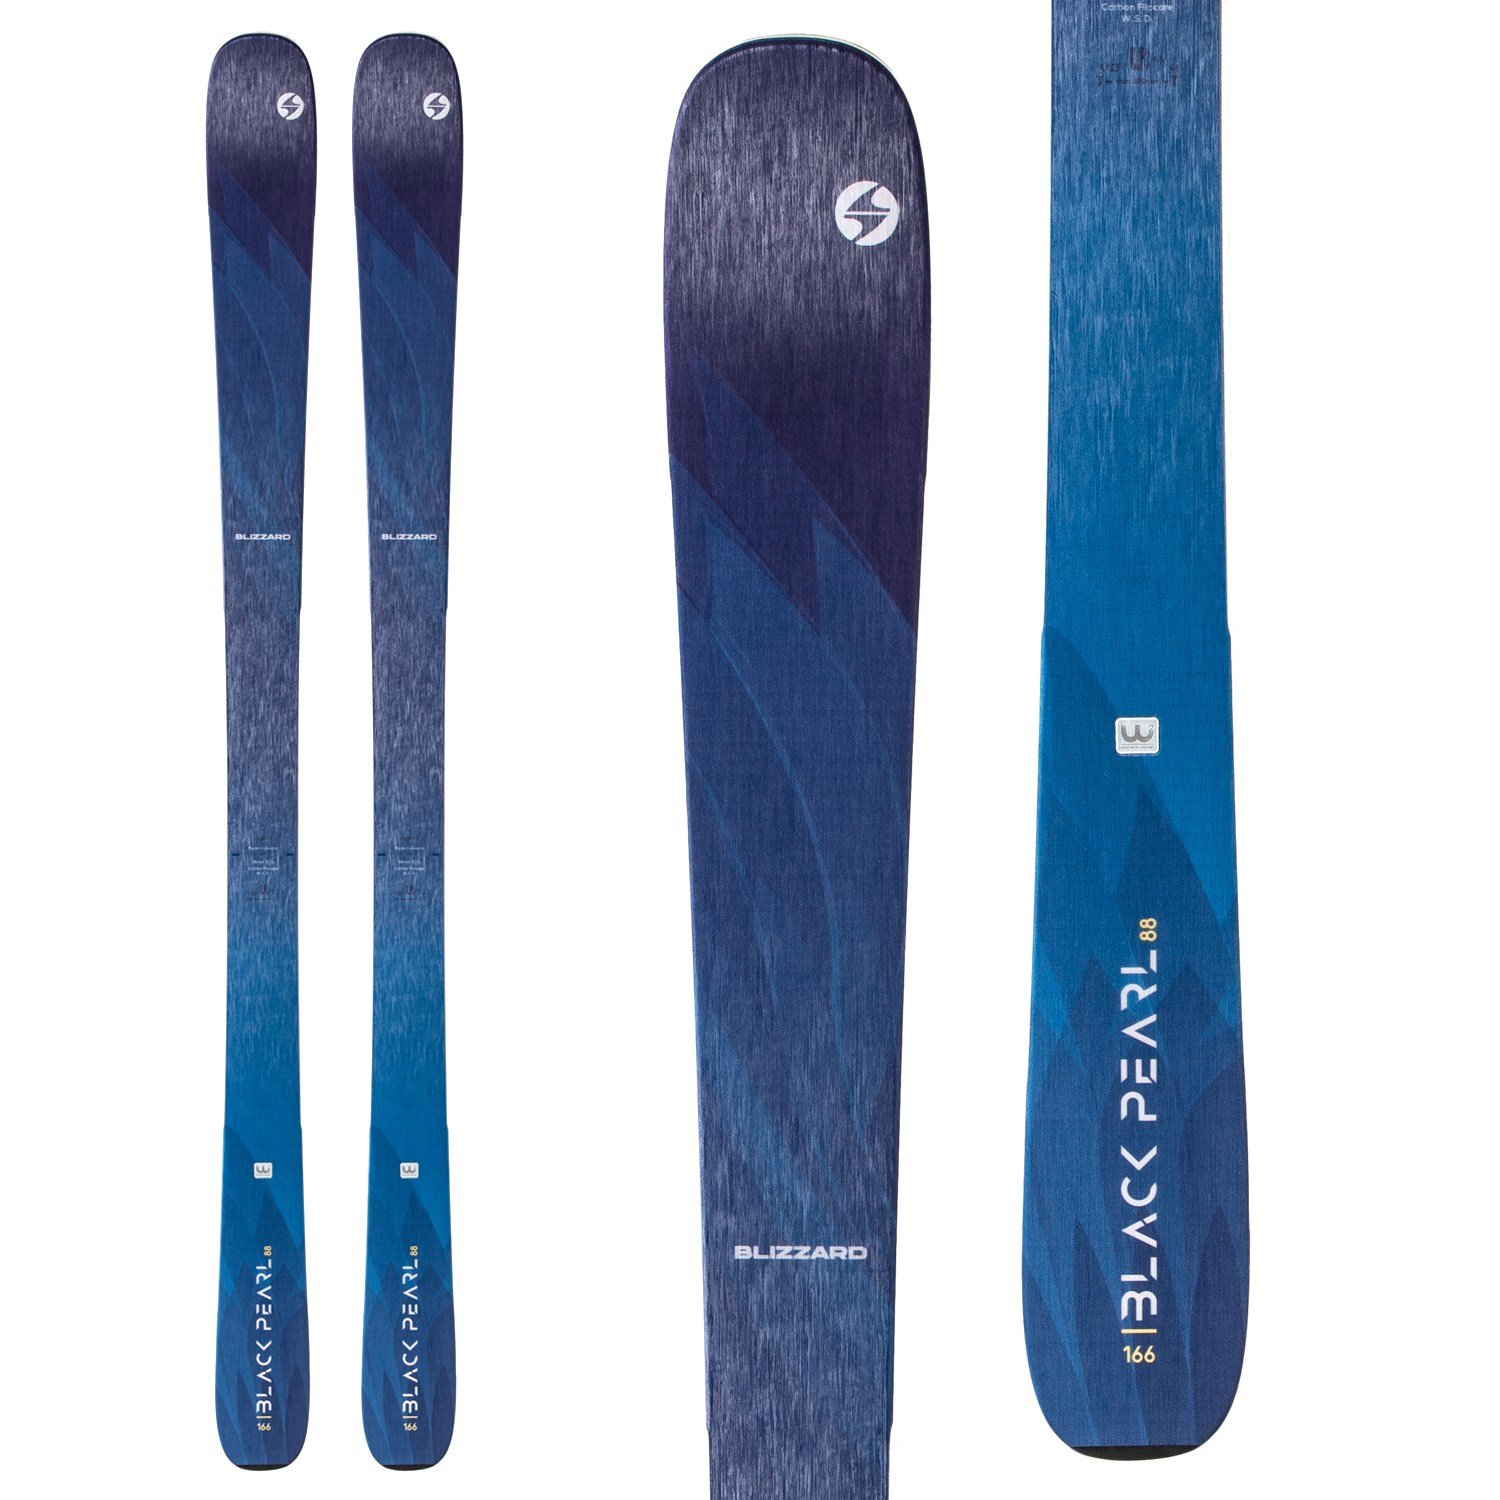 Blizzard 2020 Black Pearl 88 Skis 159cm NEW ! Without Bindings / Flat 